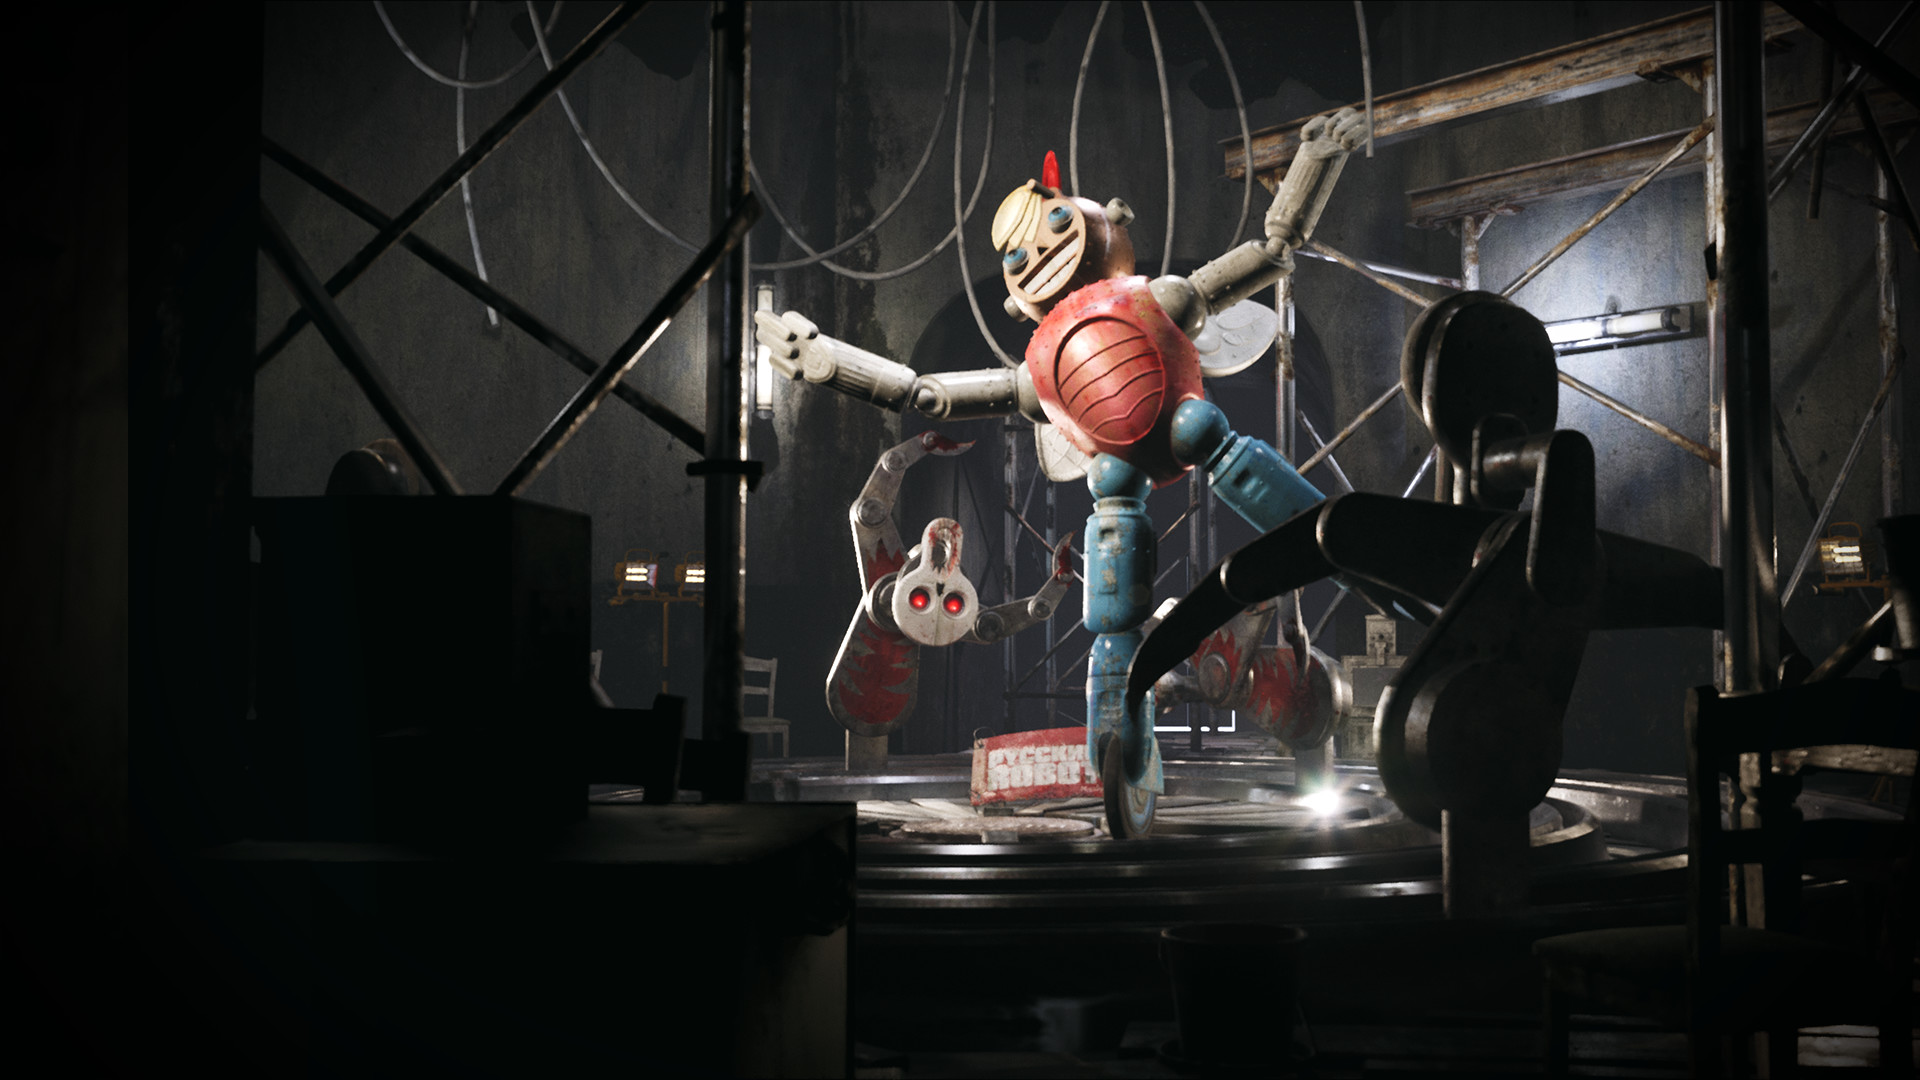 Atomic Heart 2021 Wallpapers